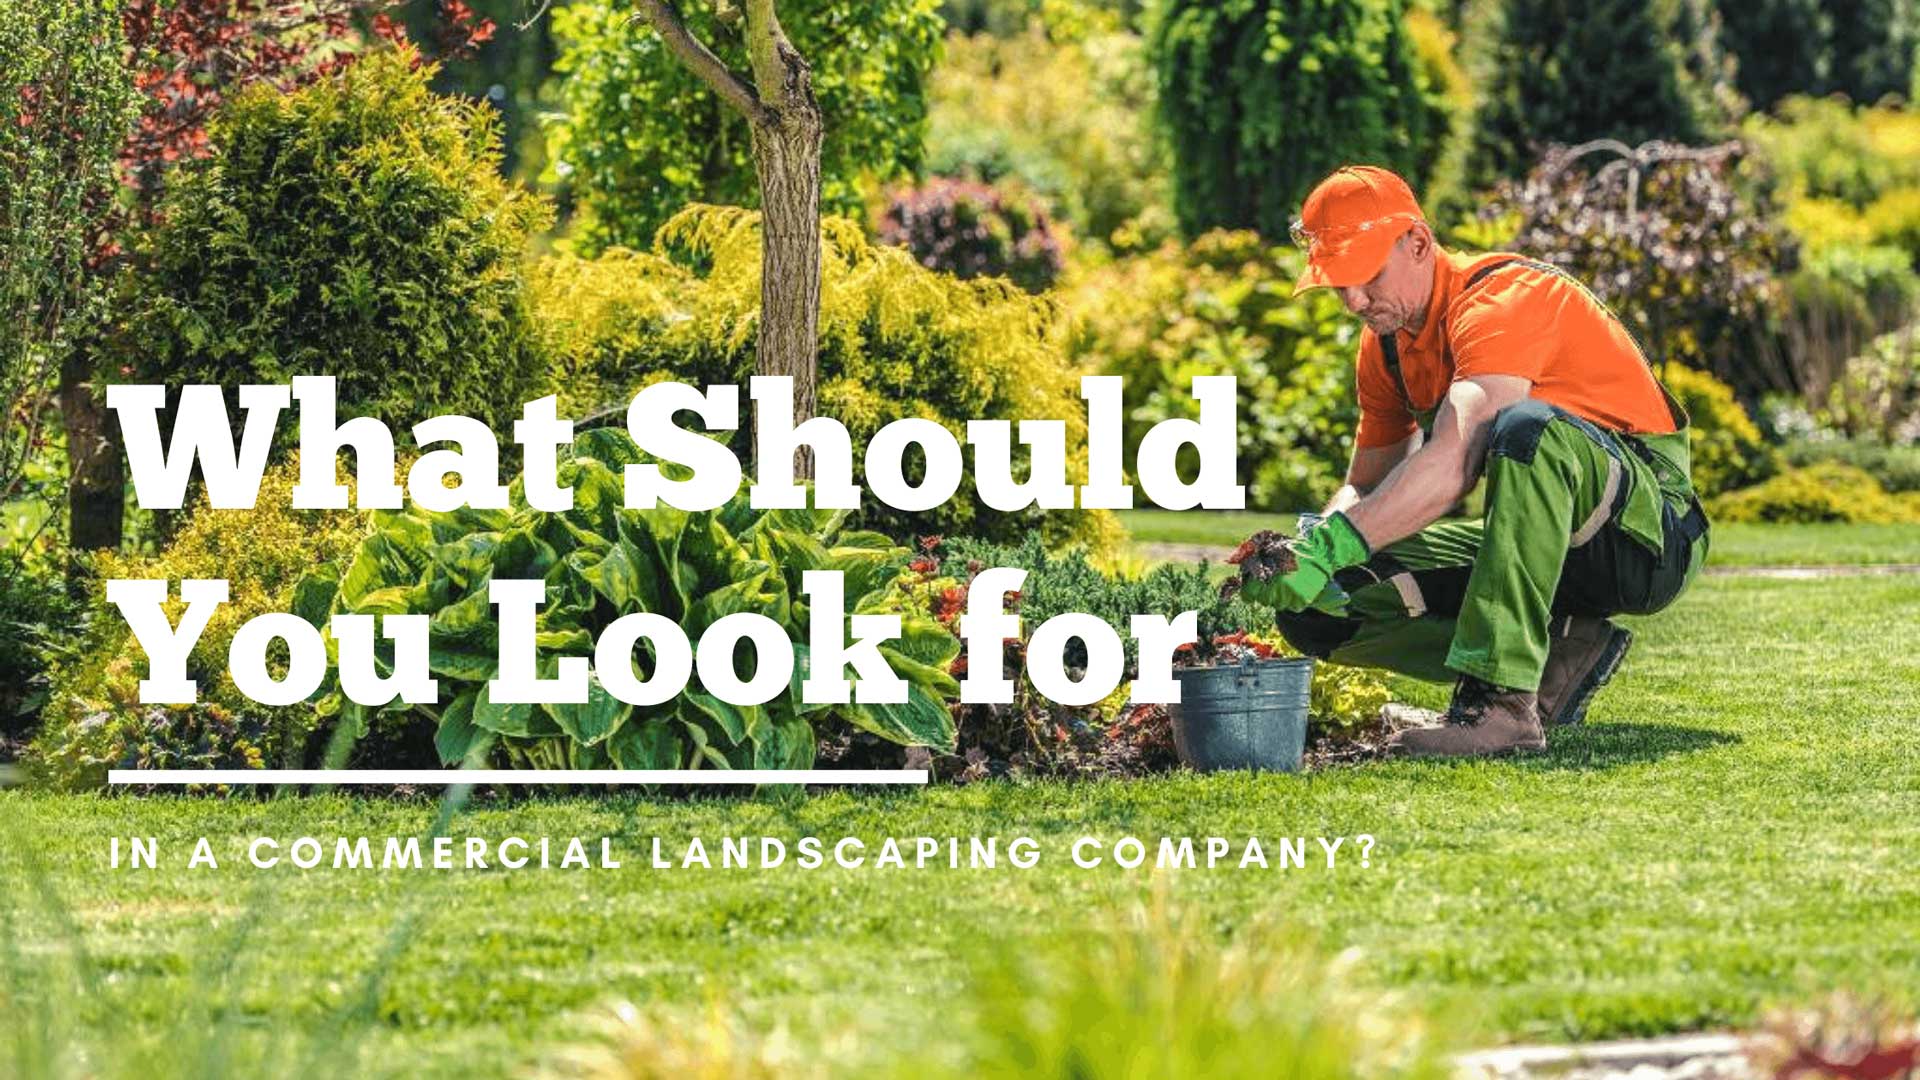 What Should You Look for In a Commercial Landscaping Company?